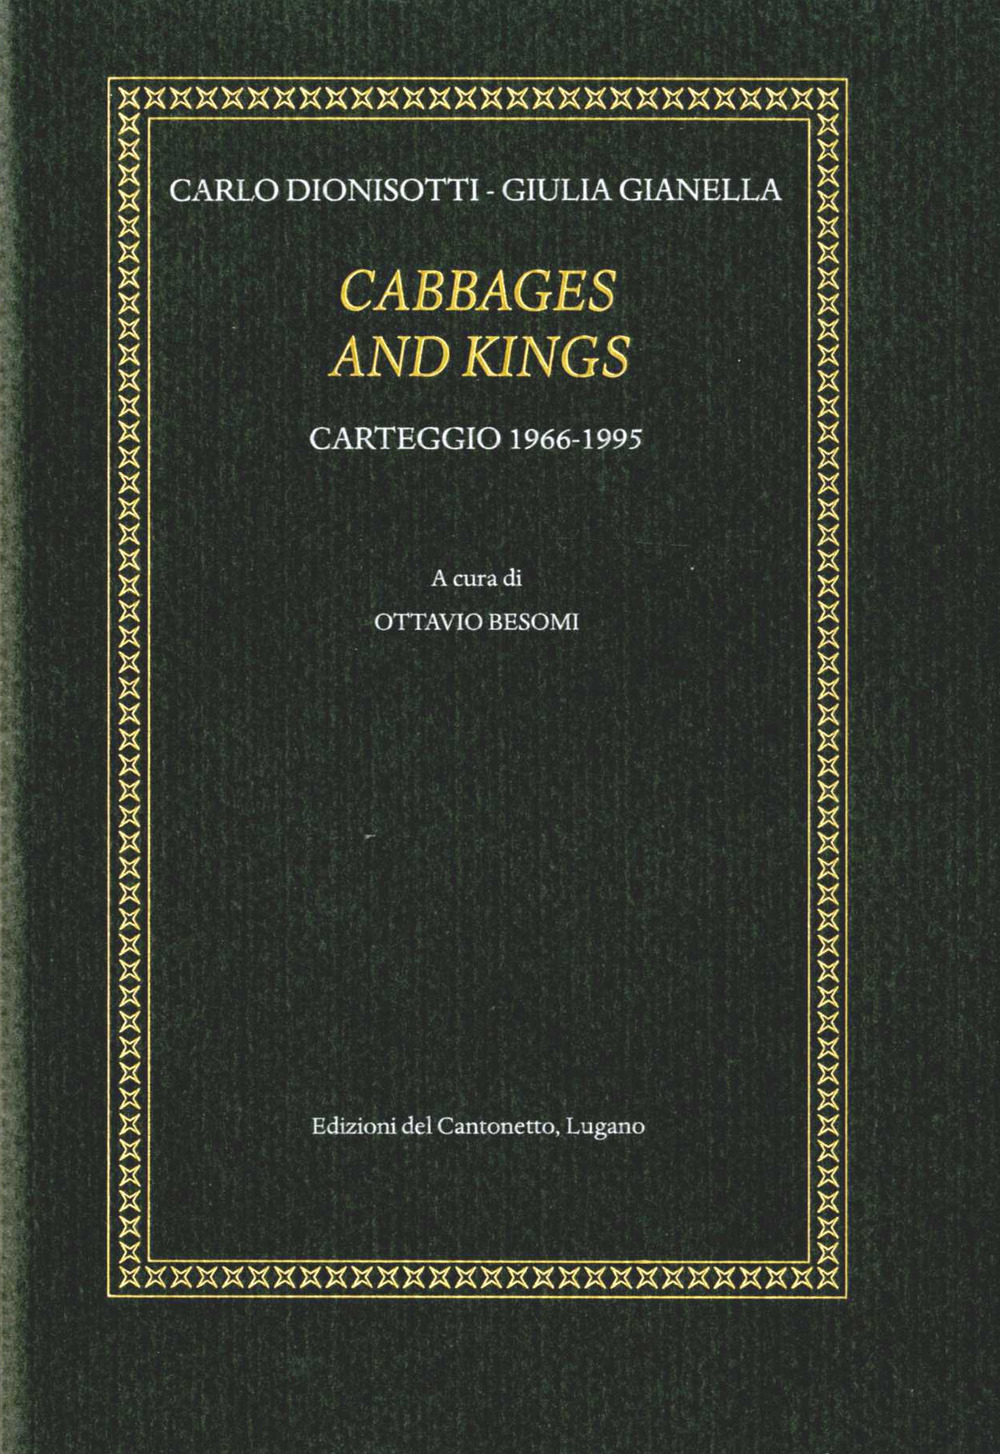 Di cabbages and kings. Carteggio (1966-1995)